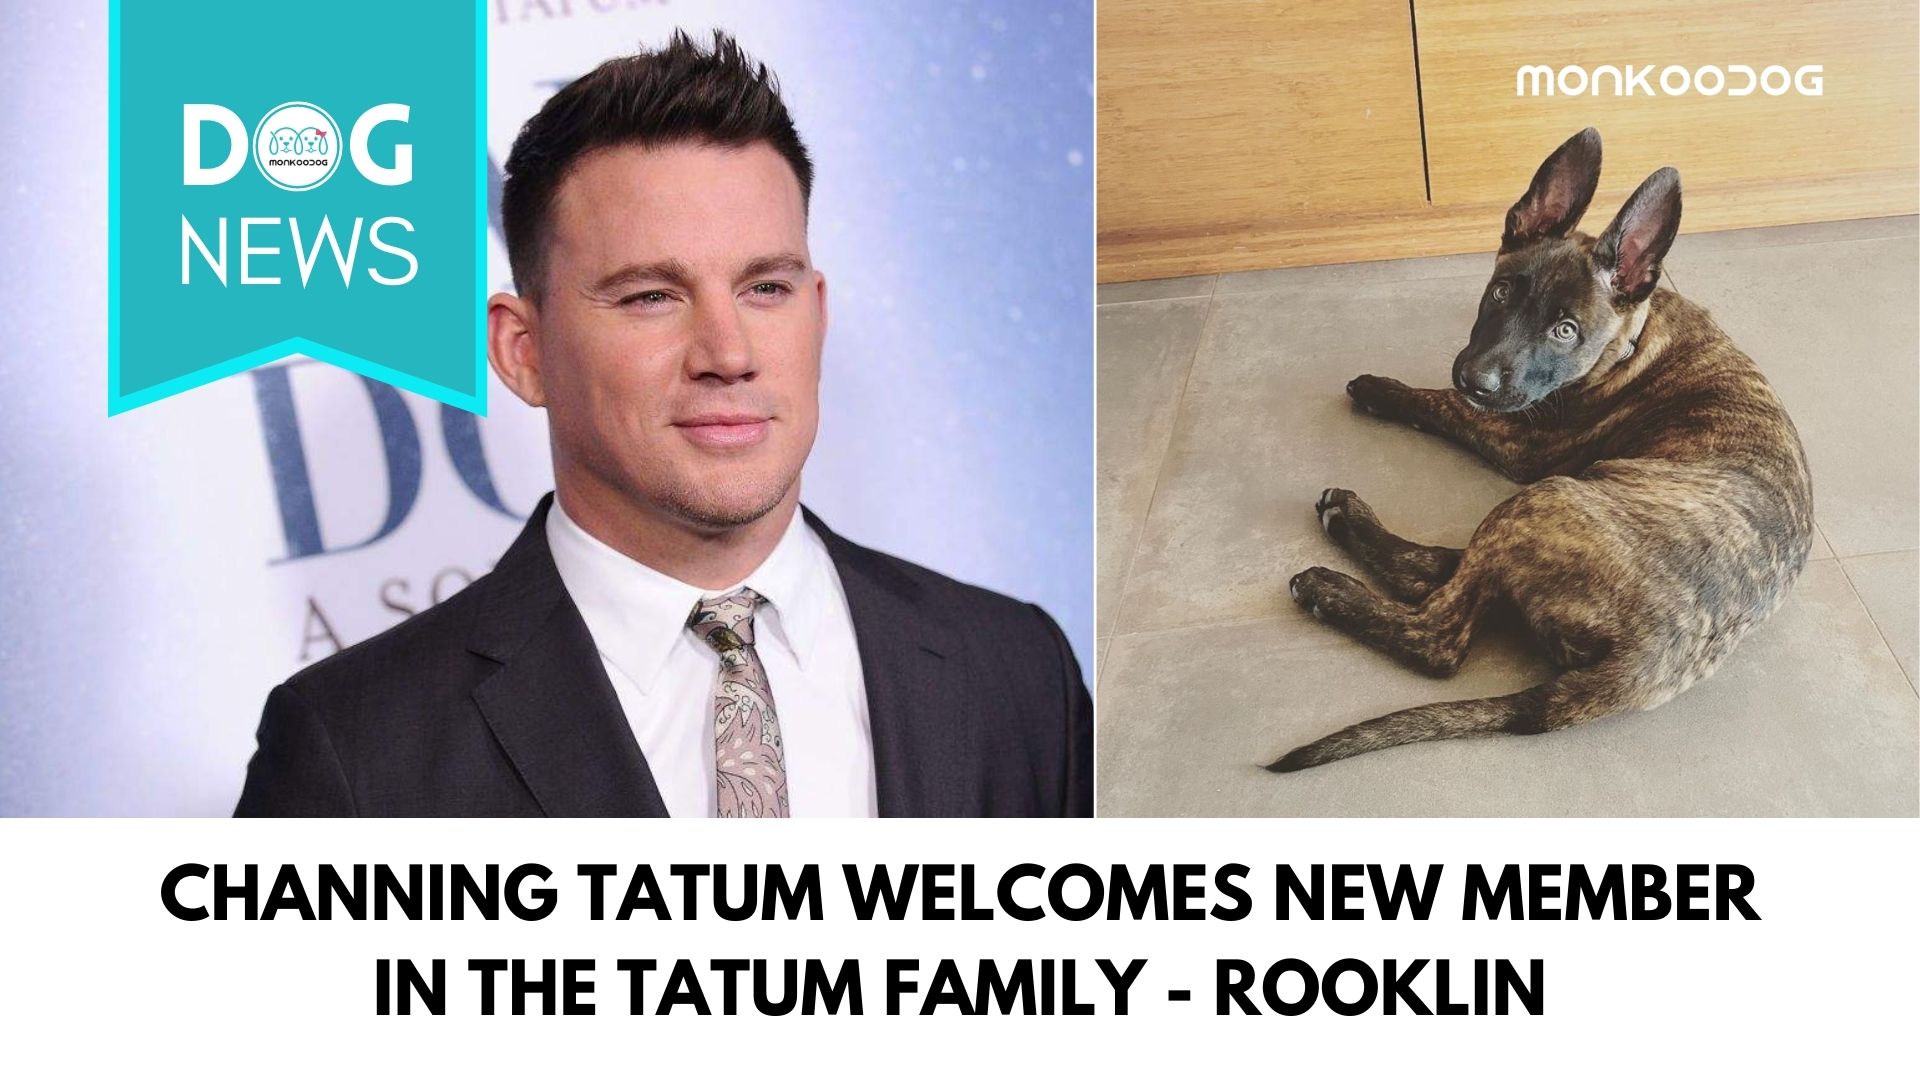 Channing Tatum Welcomes New Member In The Tatum Family While Shooting His New Movie - ‘Dog’.